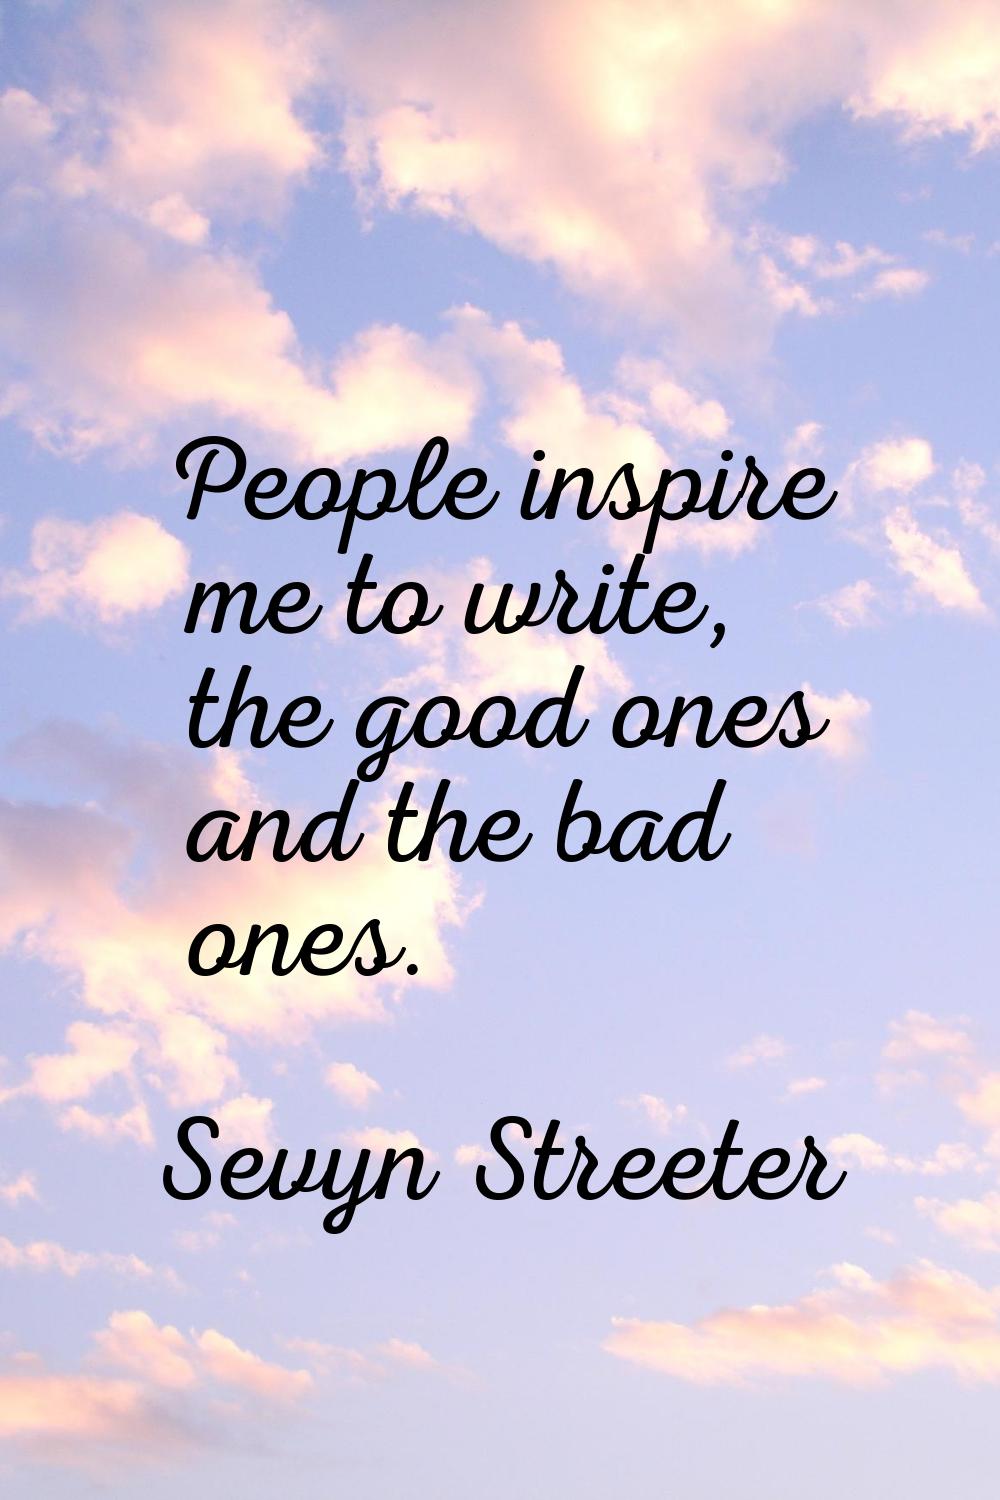 People inspire me to write, the good ones and the bad ones.